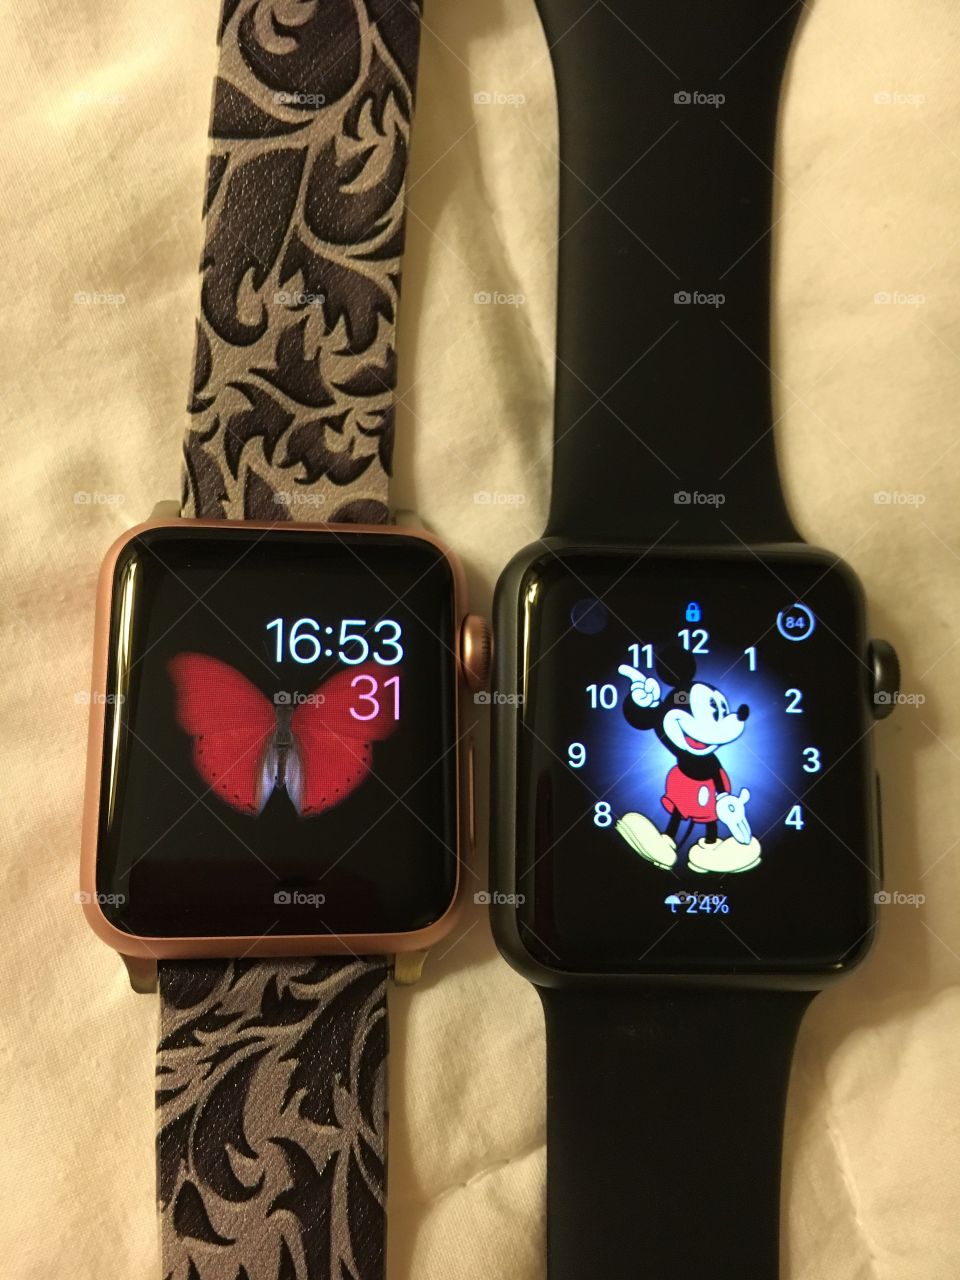 2iWatches